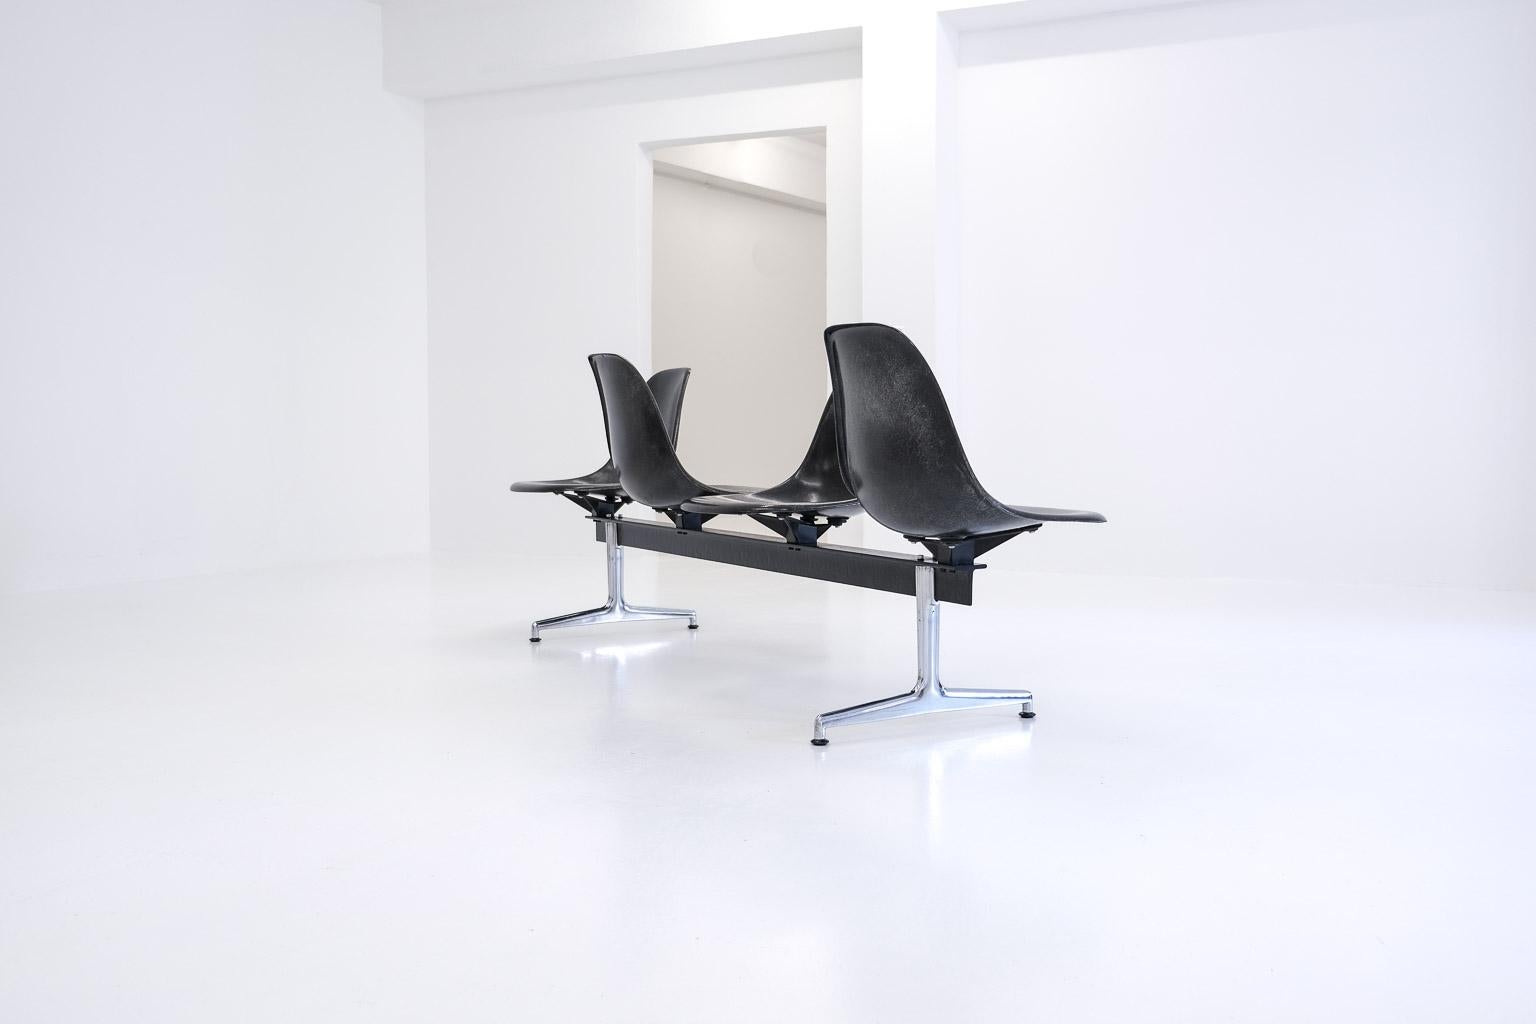 Aluminum Tandem shell seating system by Ray and Charles Eames for Herman Miller